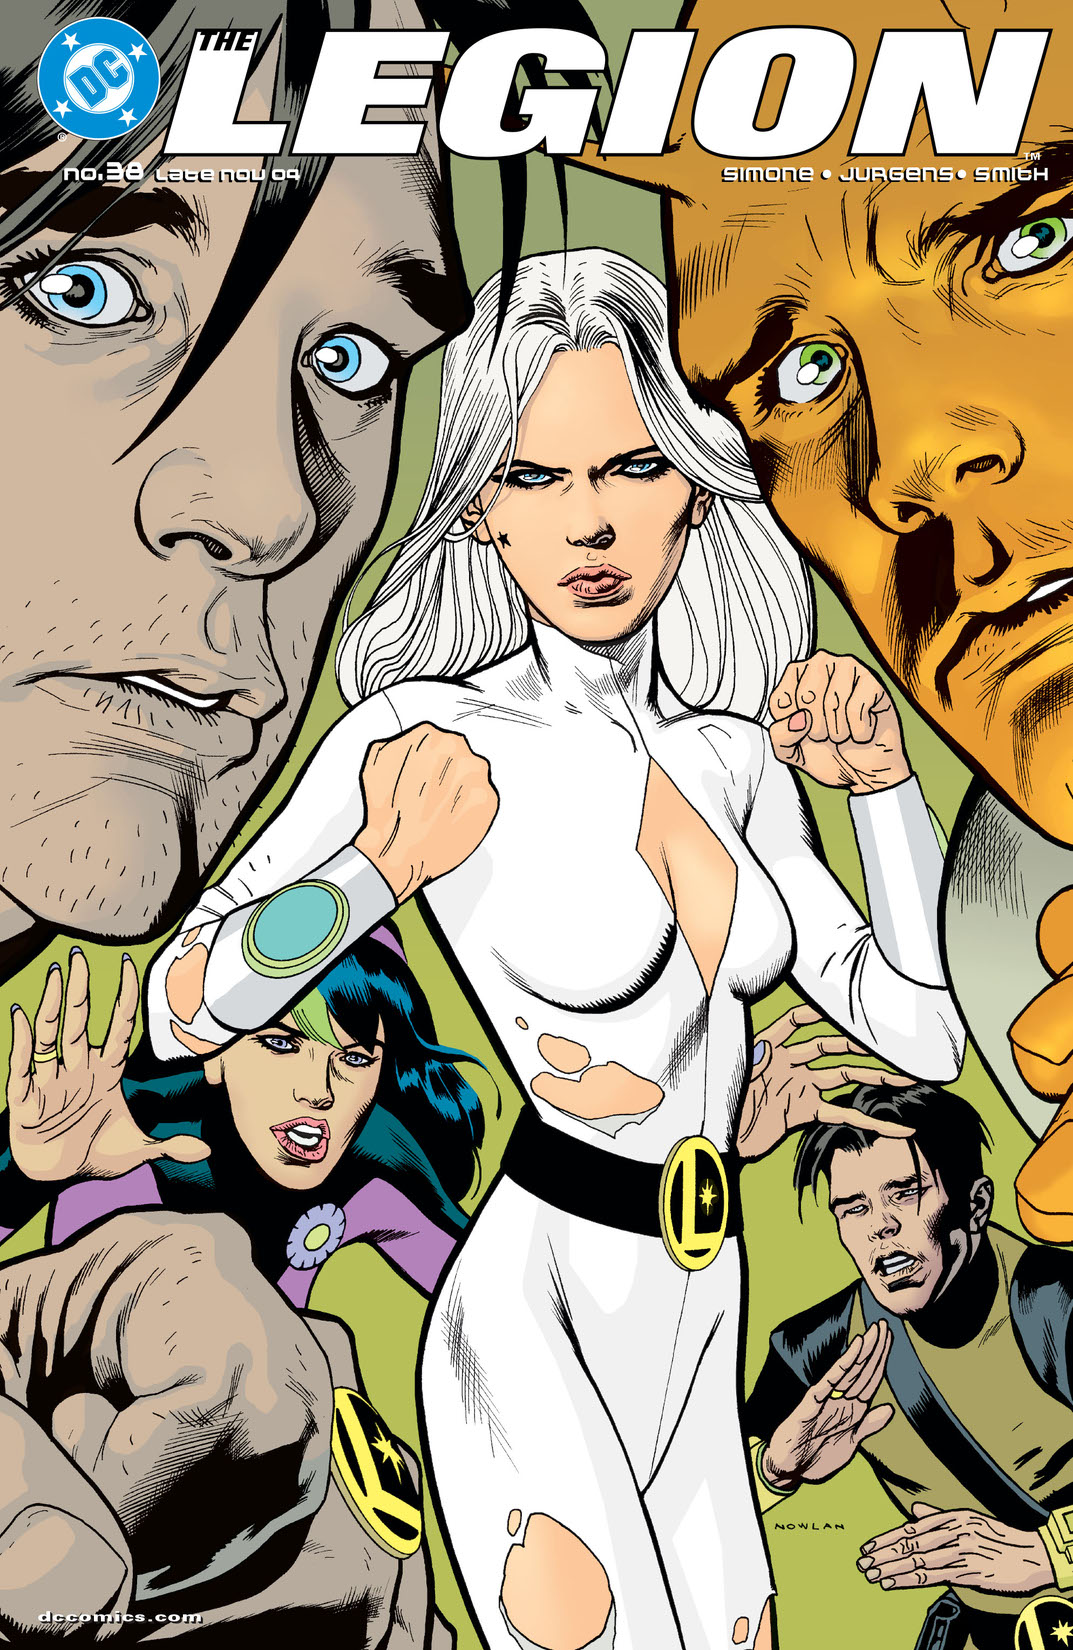 The Legion #38 preview images